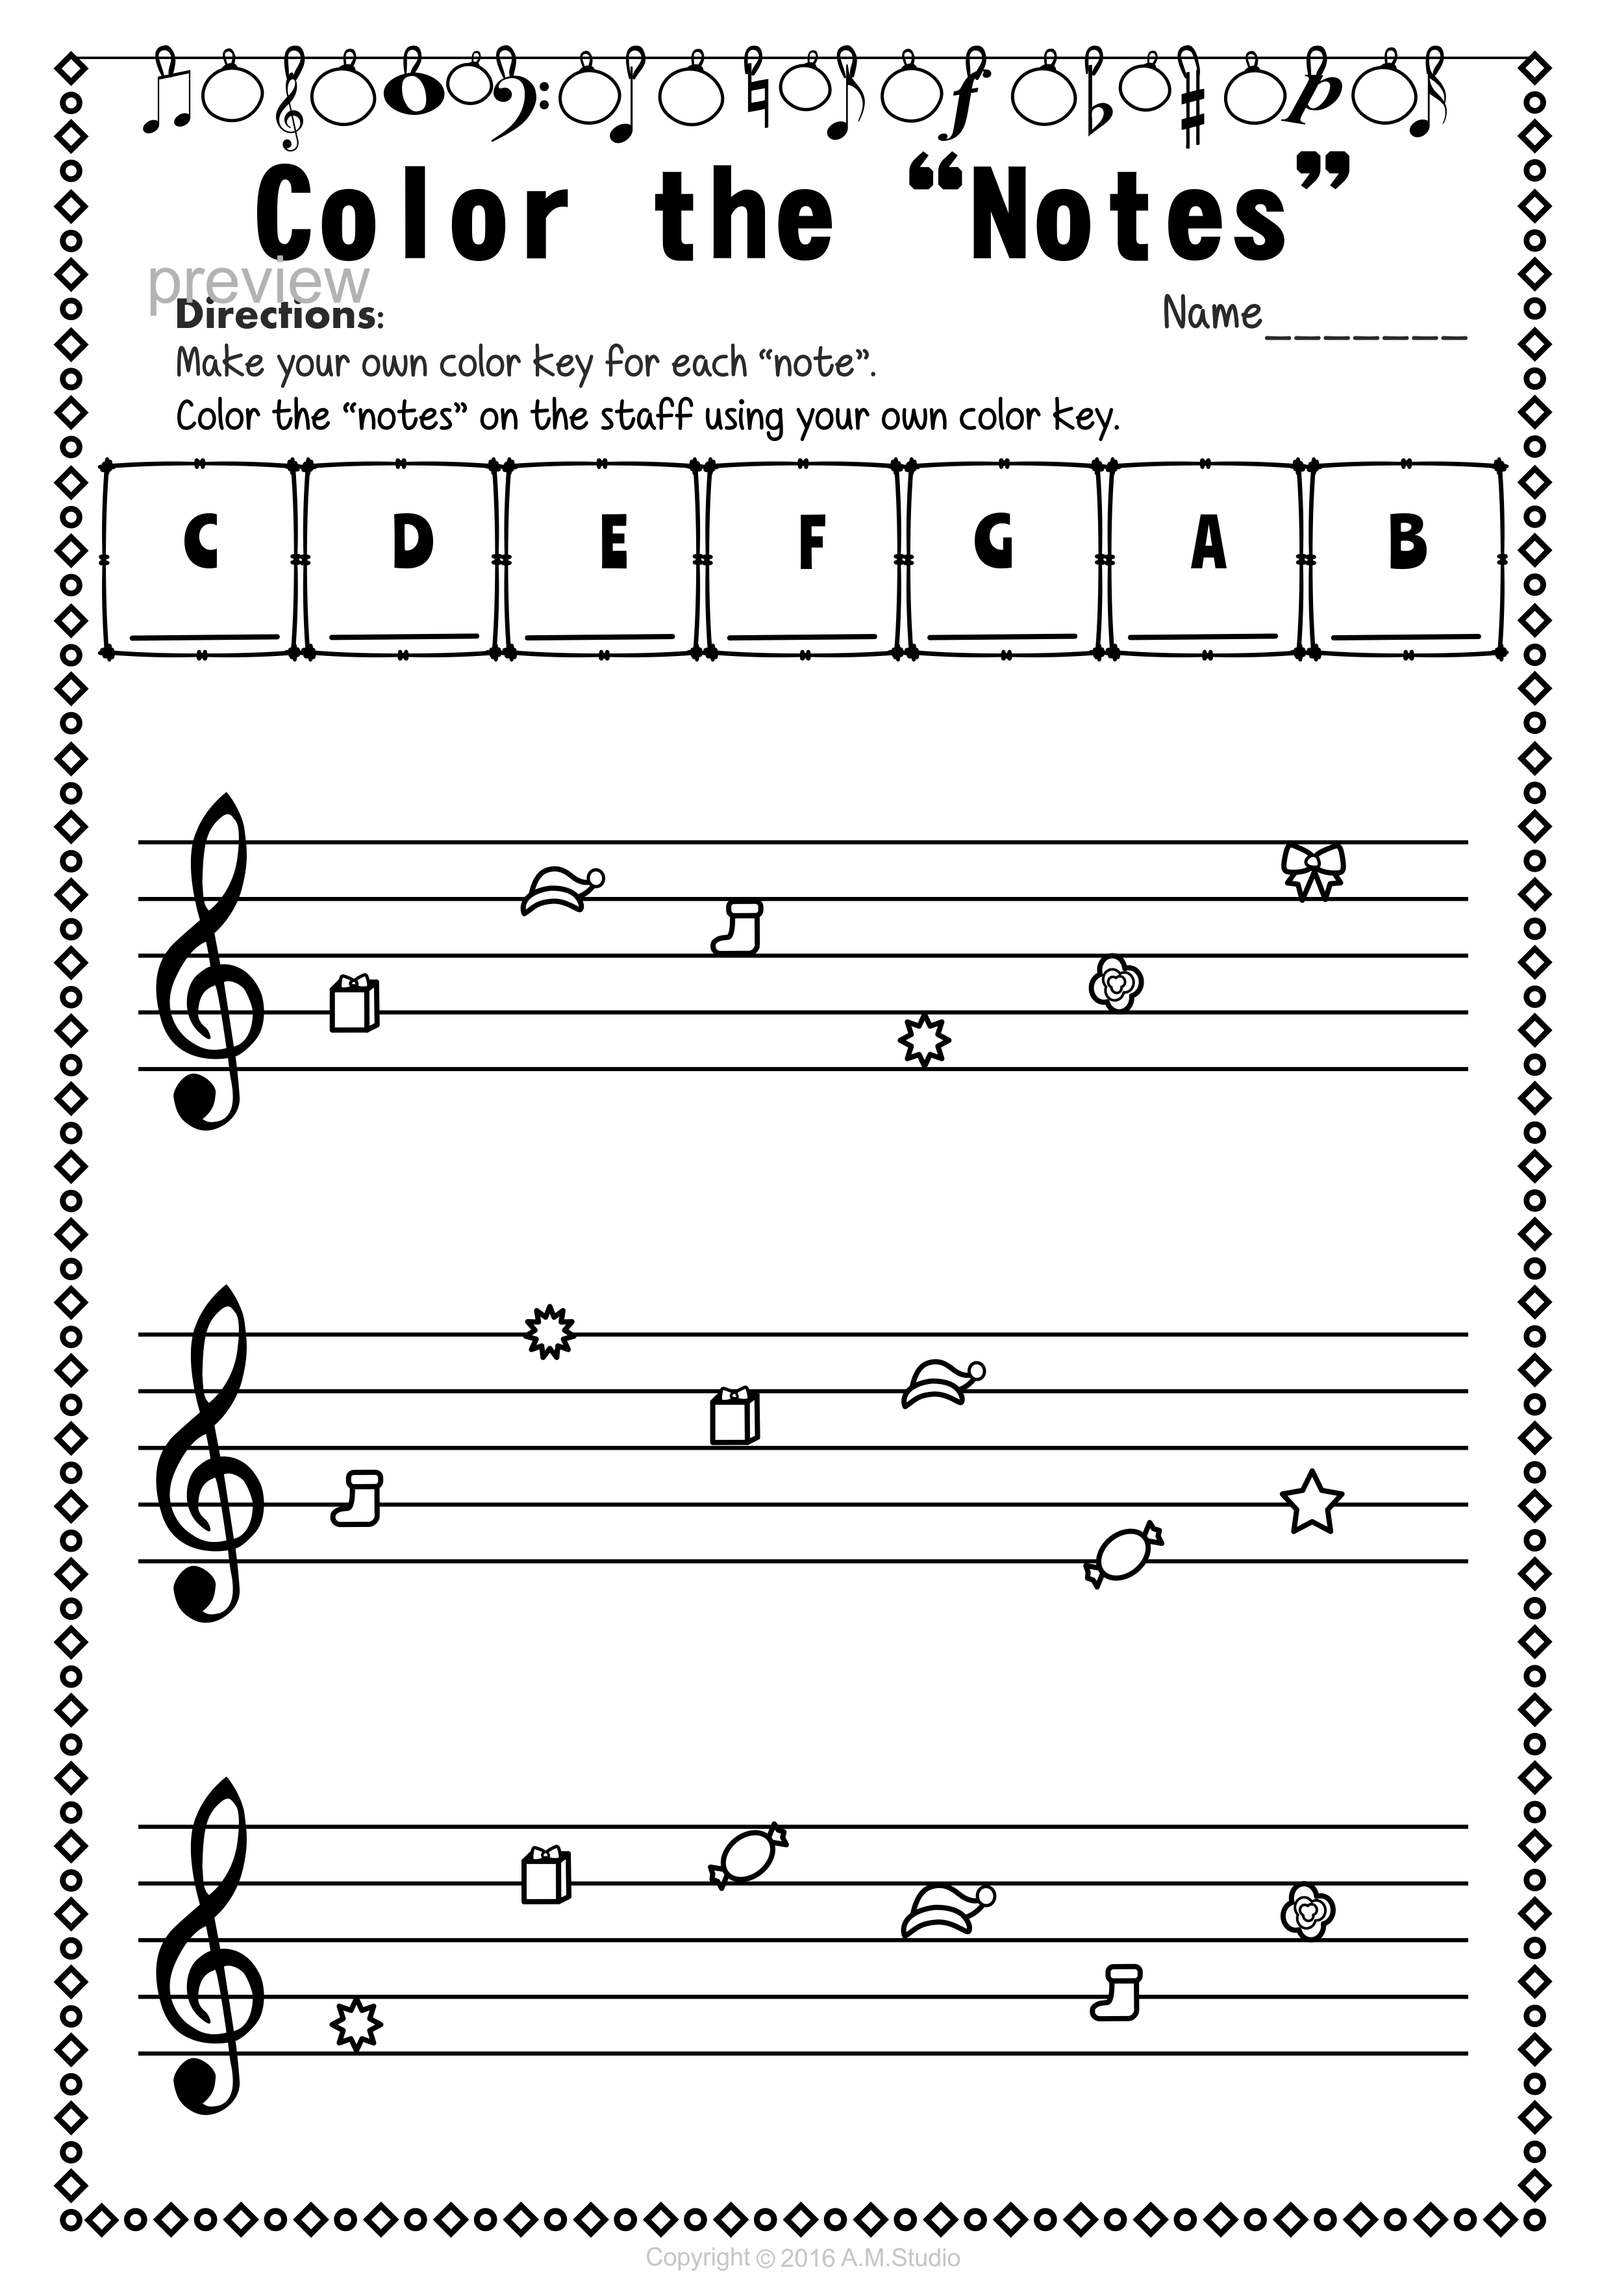 This Set Of 12 Music Worksheets Christmas Themed Is Designed